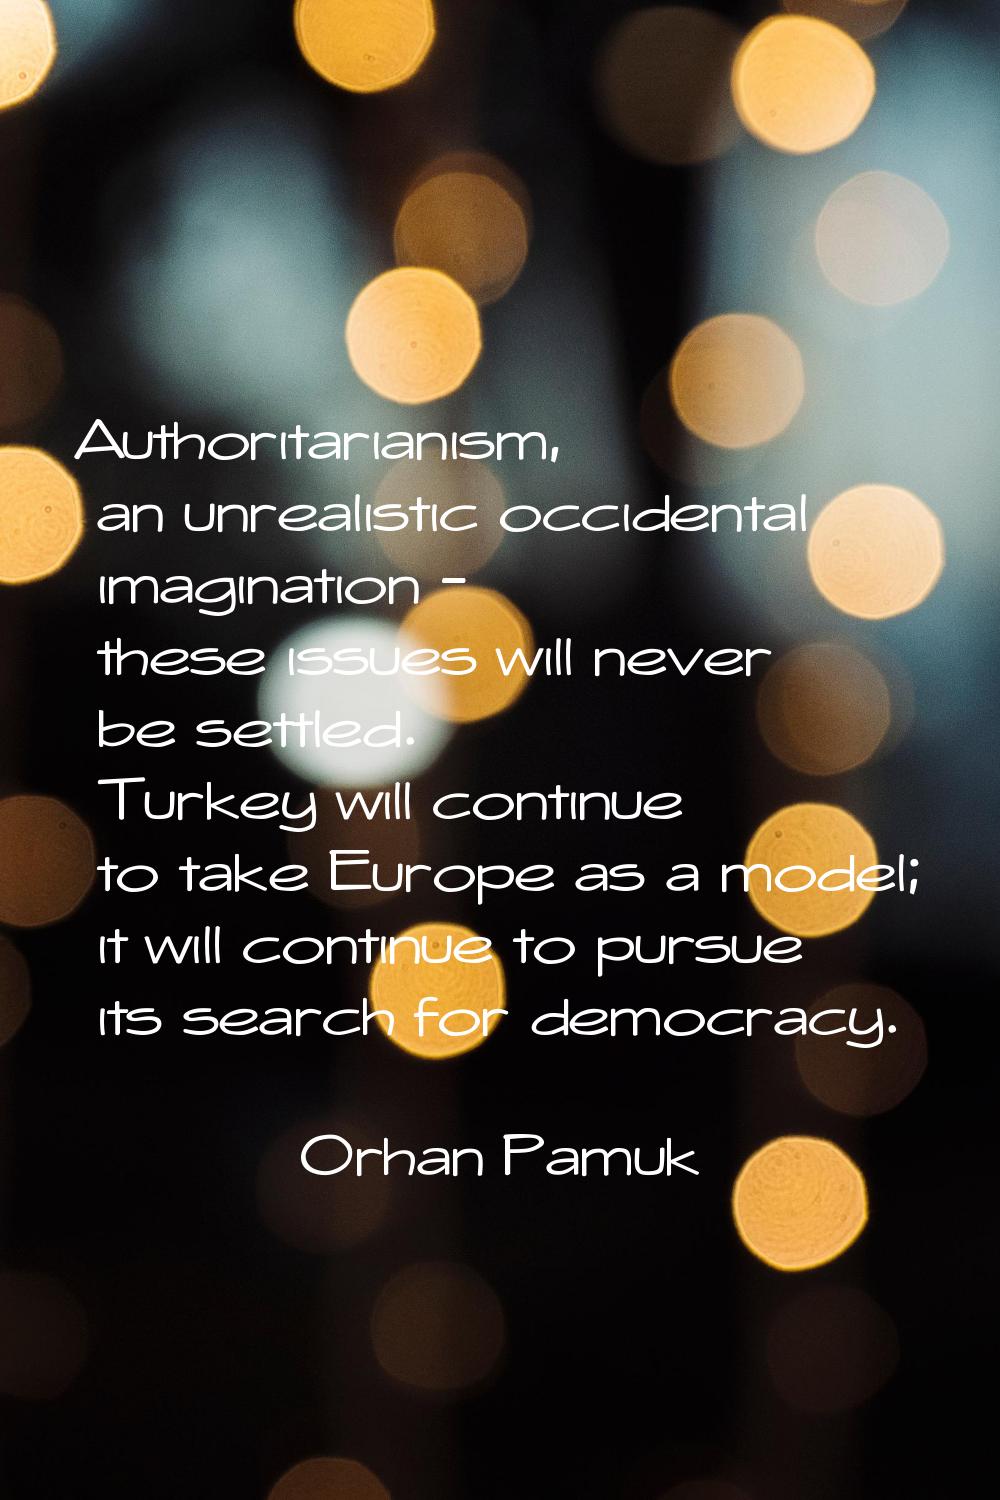 Authoritarianism, an unrealistic occidental imagination - these issues will never be settled. Turke